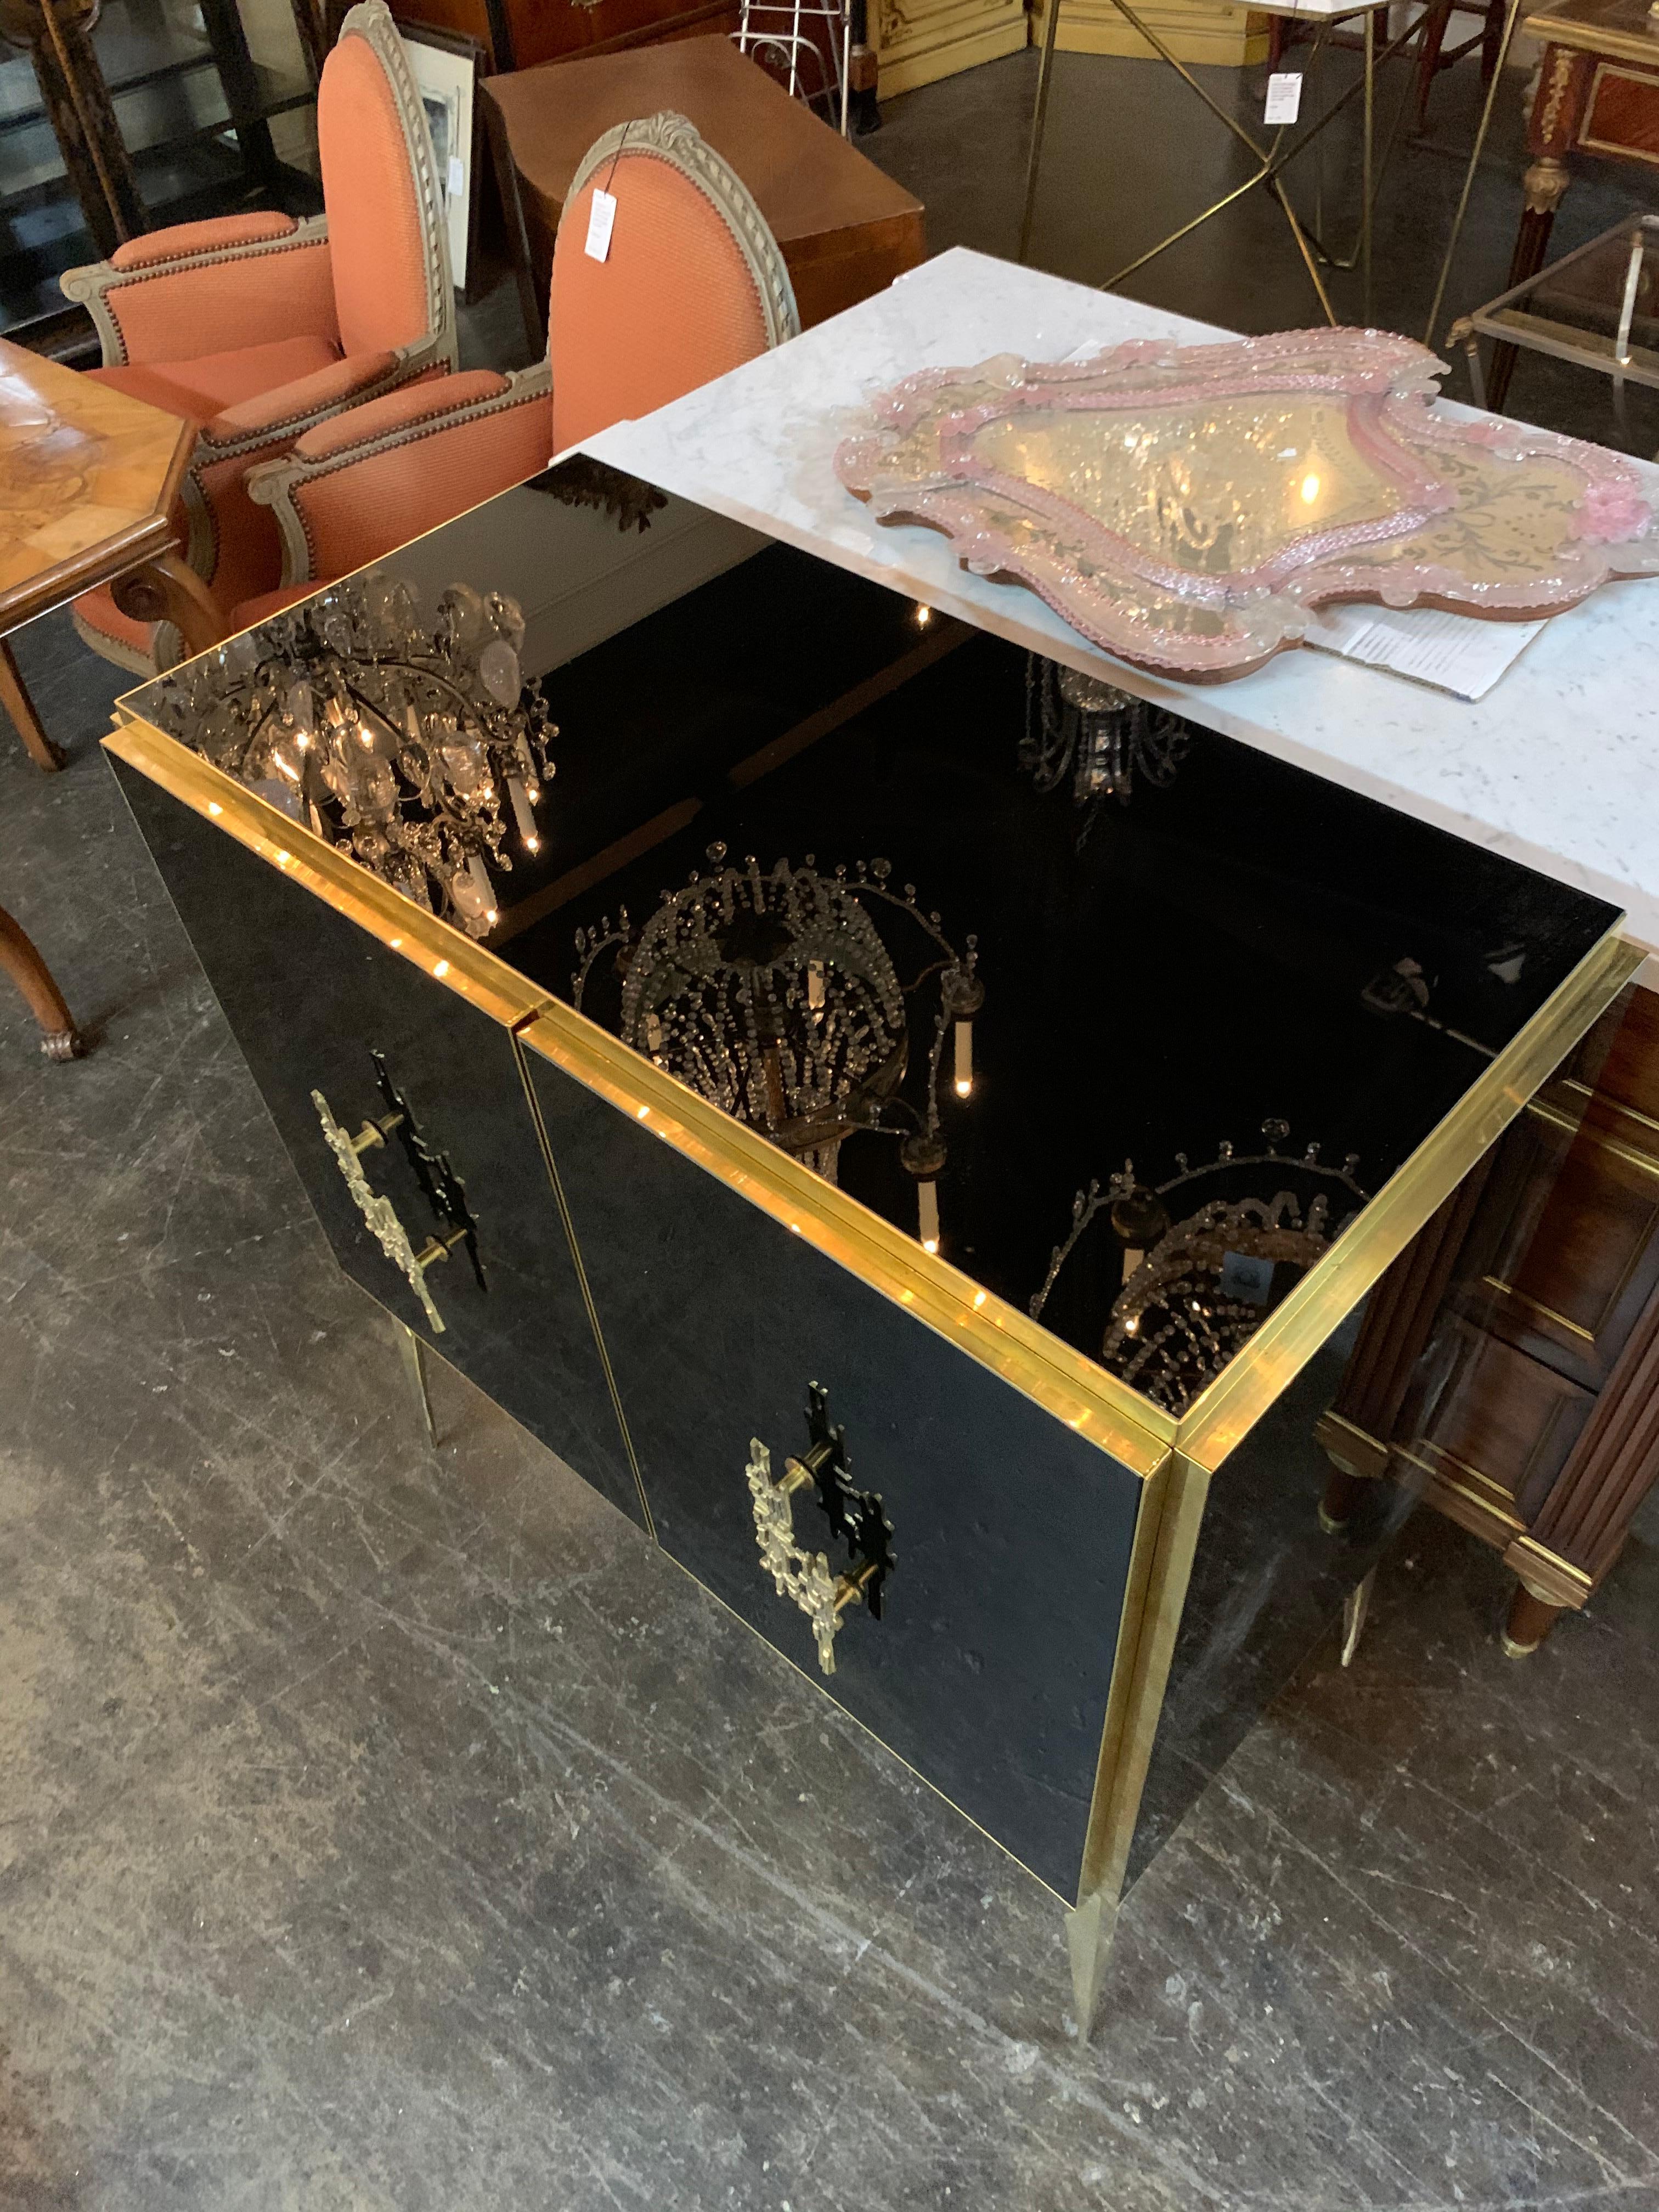 Stunning modern Italian black glass and brass side cabinet. Glistening black glass with lovely brass accents. Very fine quality and an excellent piece for a high end design. Exquisite!